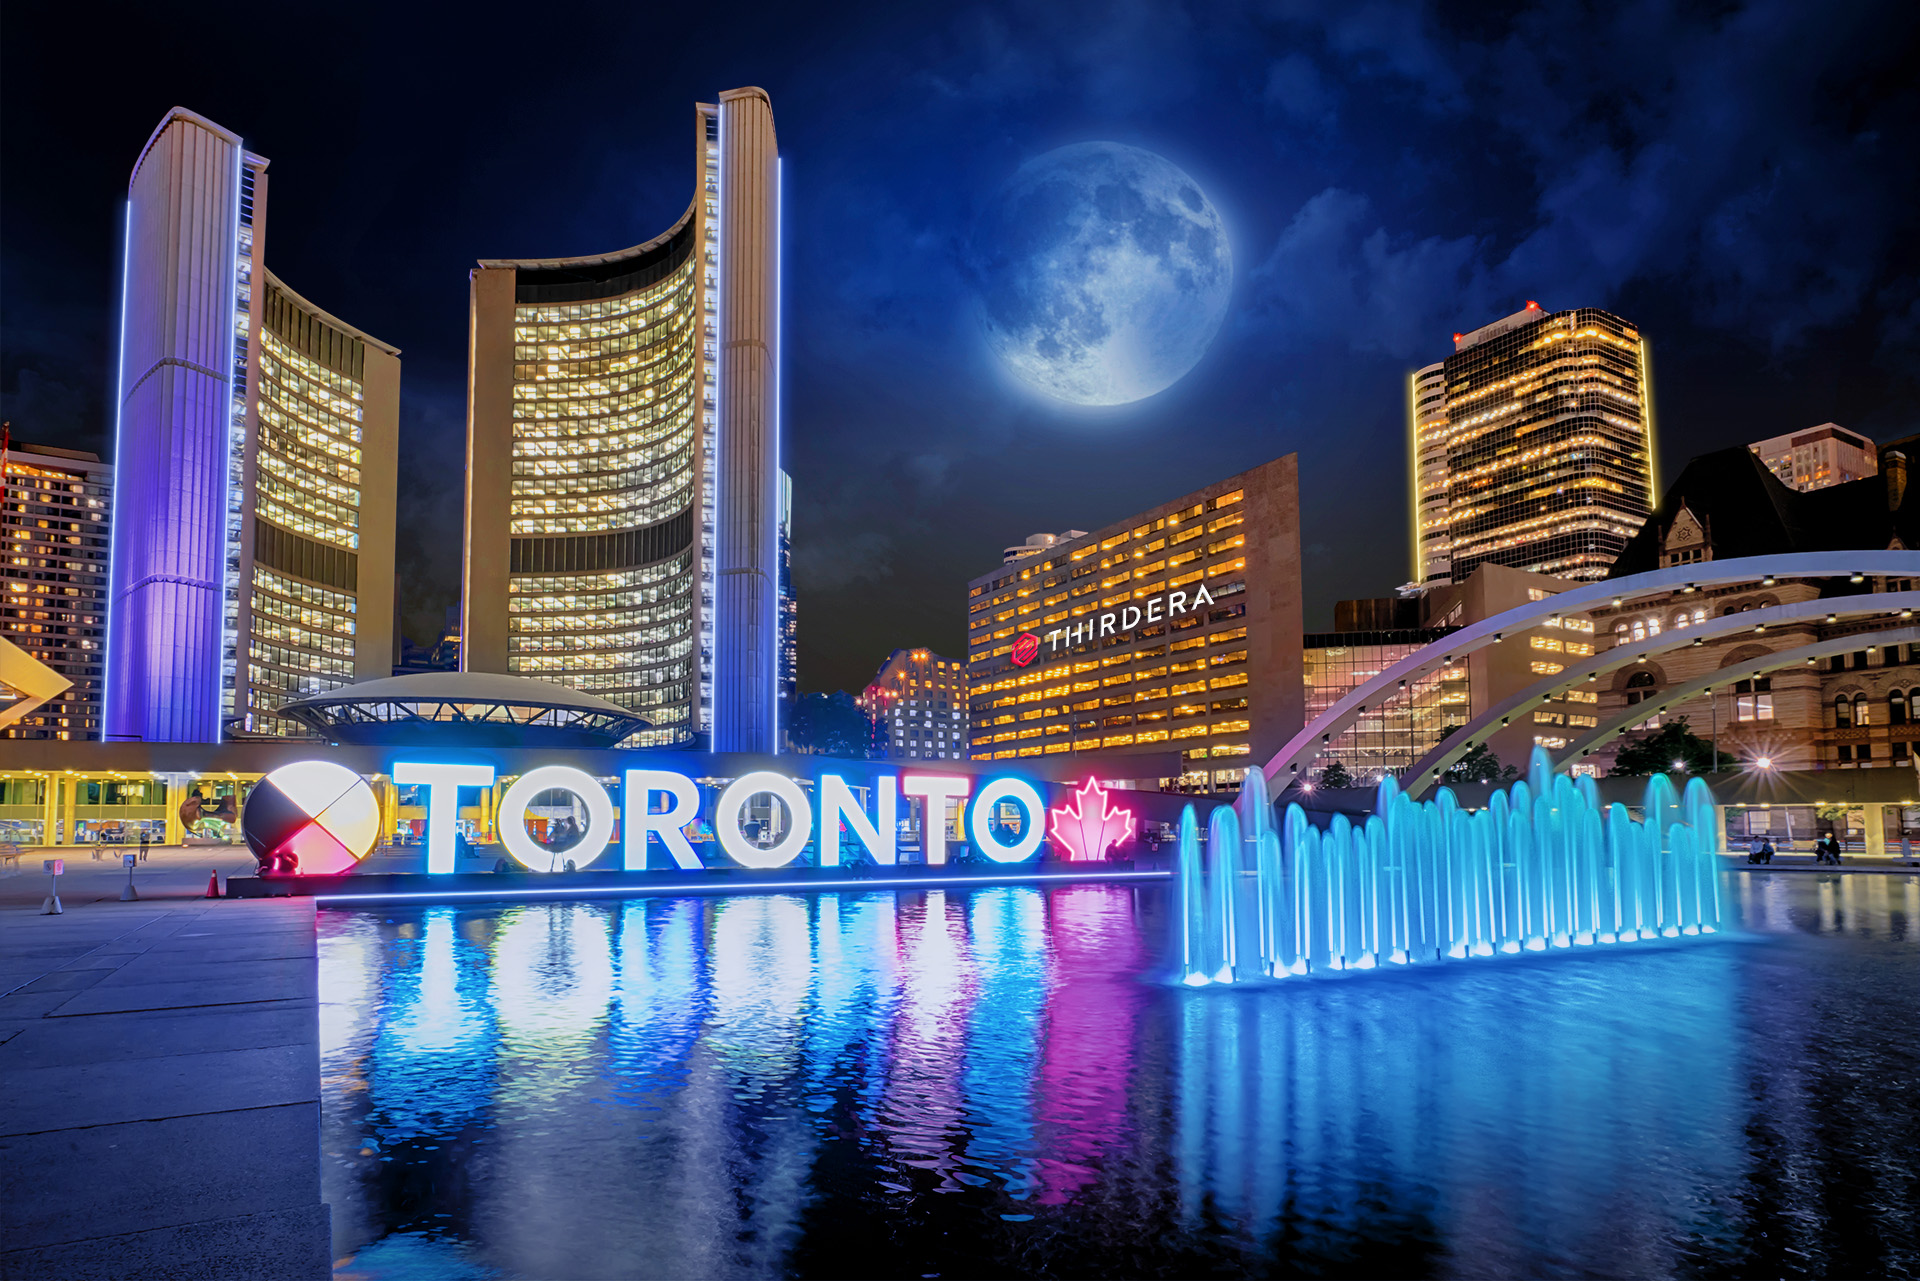 City Hall building with the Toronto sign 2022-08